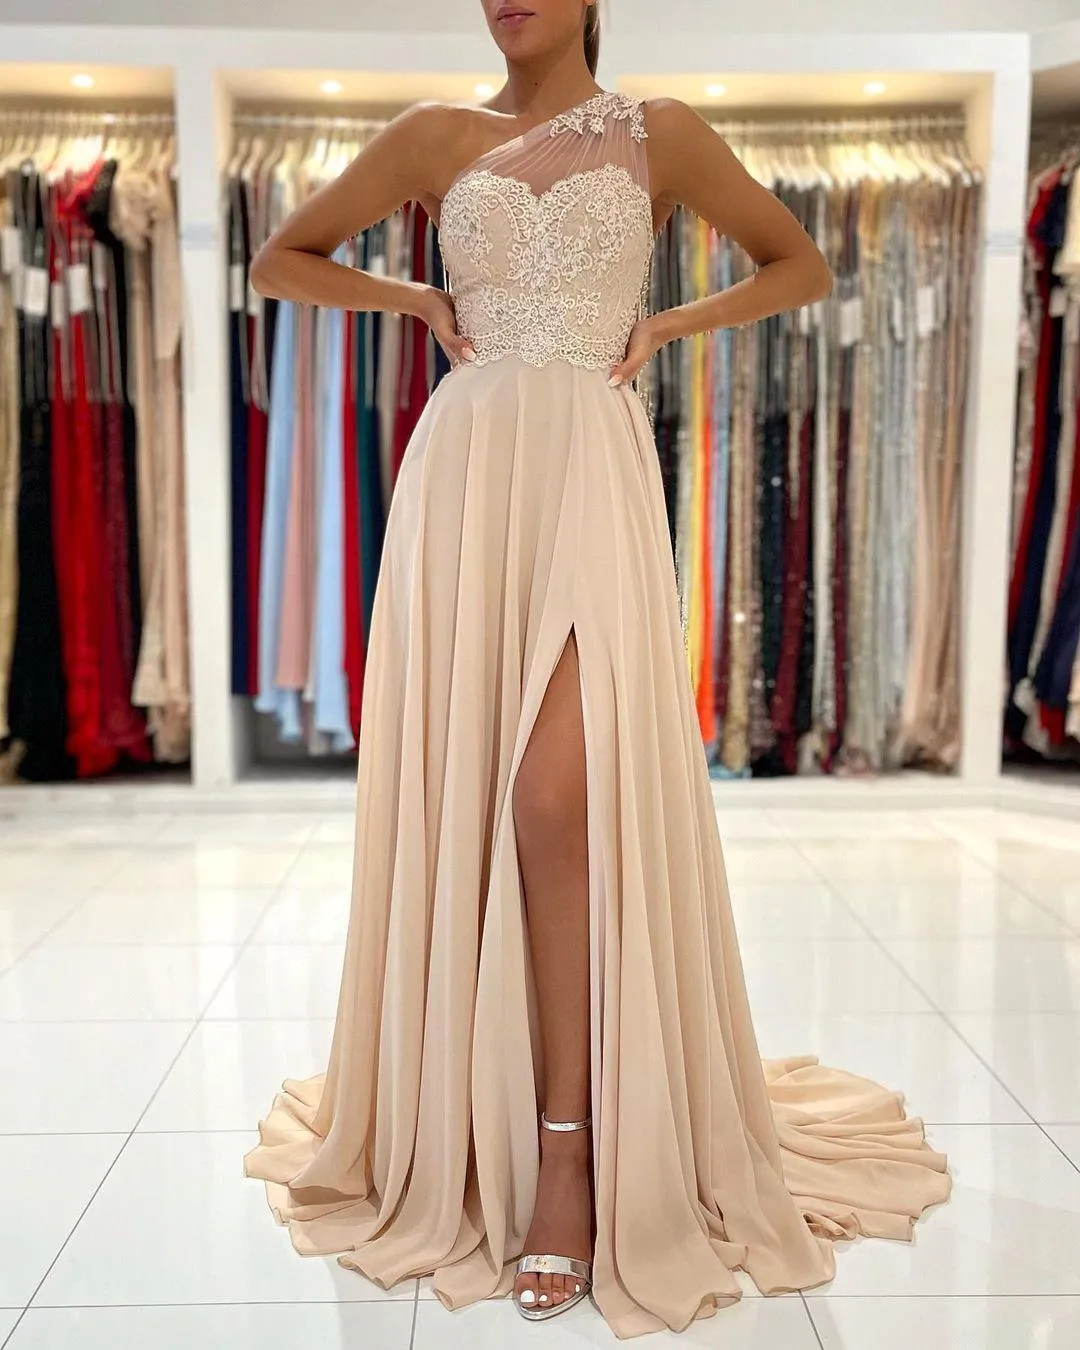 2023 Bridesmaid Dresses Simple Champagne One Shoulder with Sheer Appliques Lace Chiffon Side Split Long Maid of Honor Gowns Prom Evening Dress Floor Length